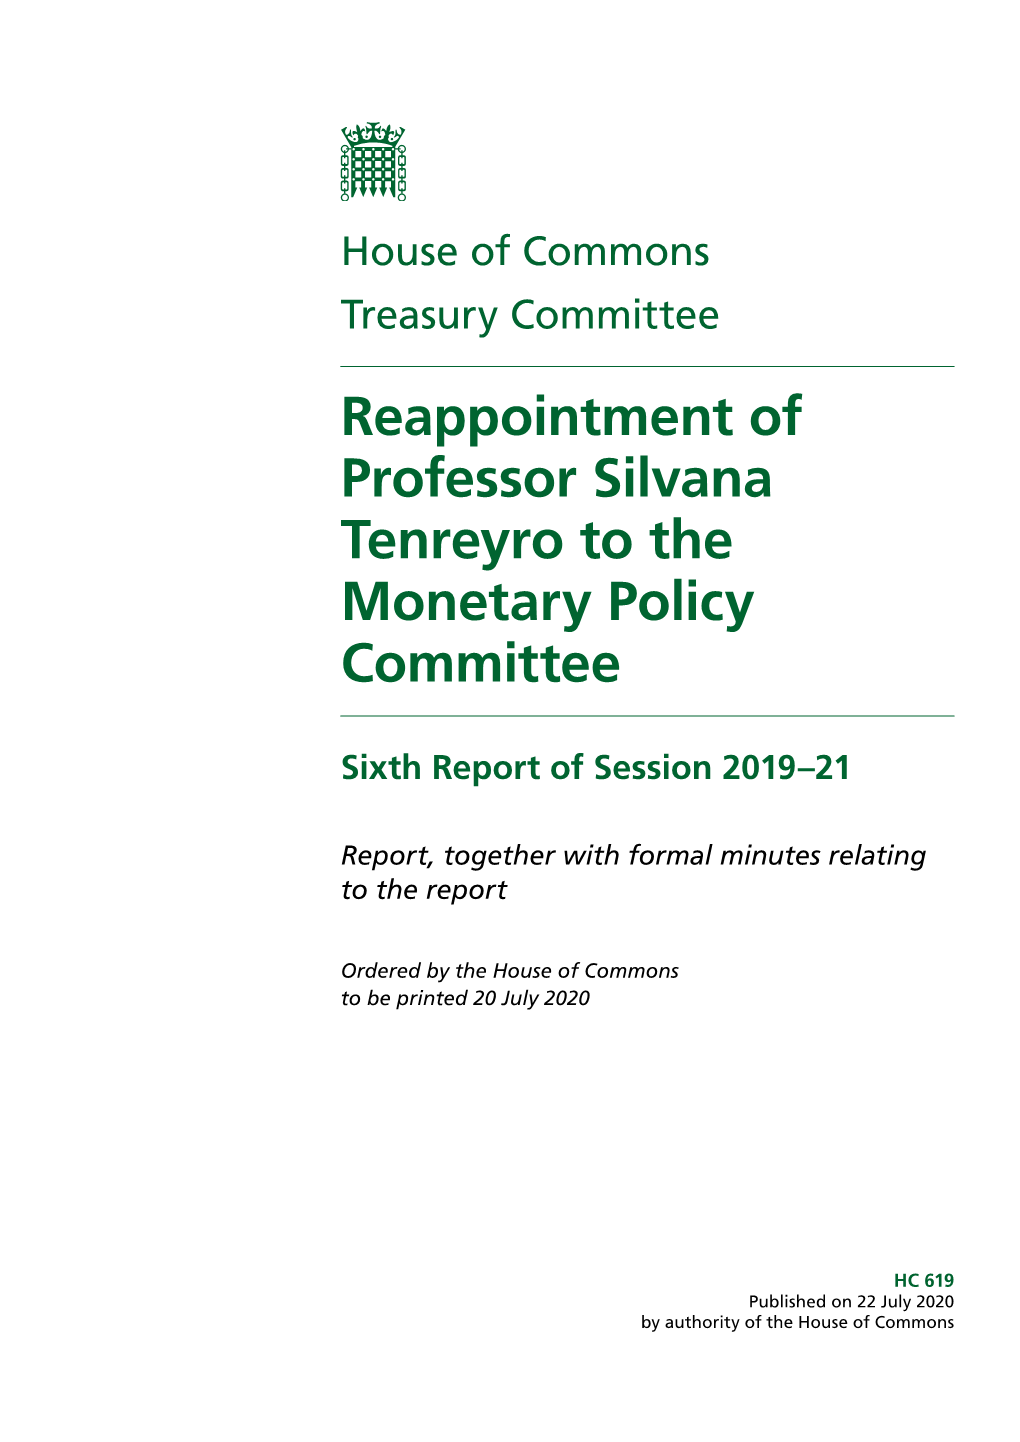 Reappointment of Professor Silvana Tenreyro to the Monetary Policy Committee